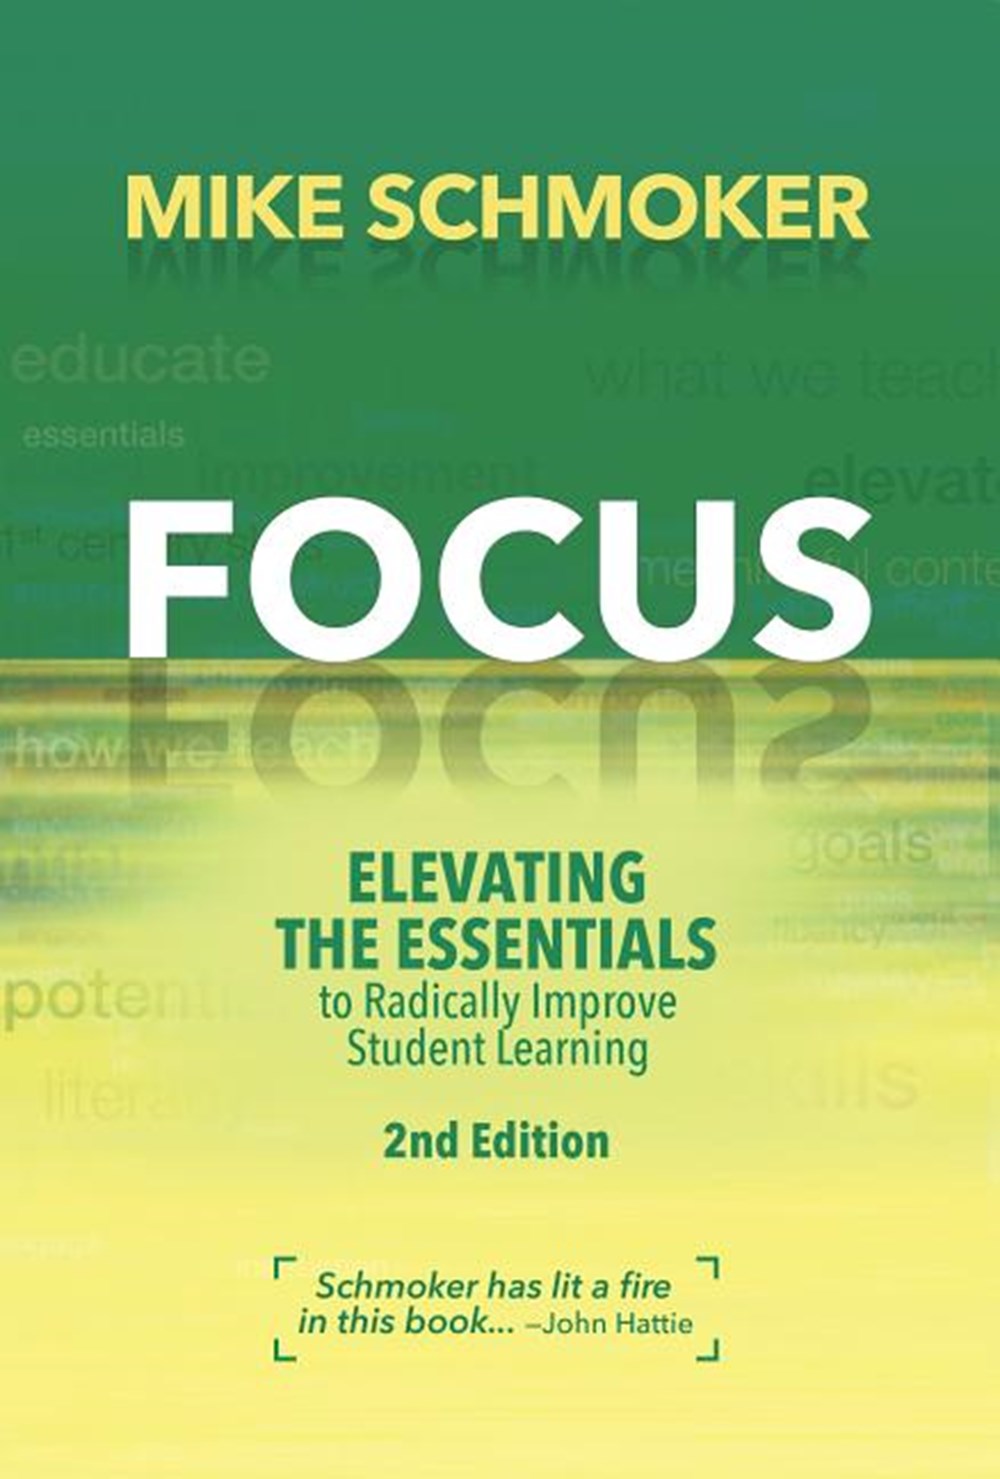 Focus: Elevating the Essentials to Radically Improve Student Learning